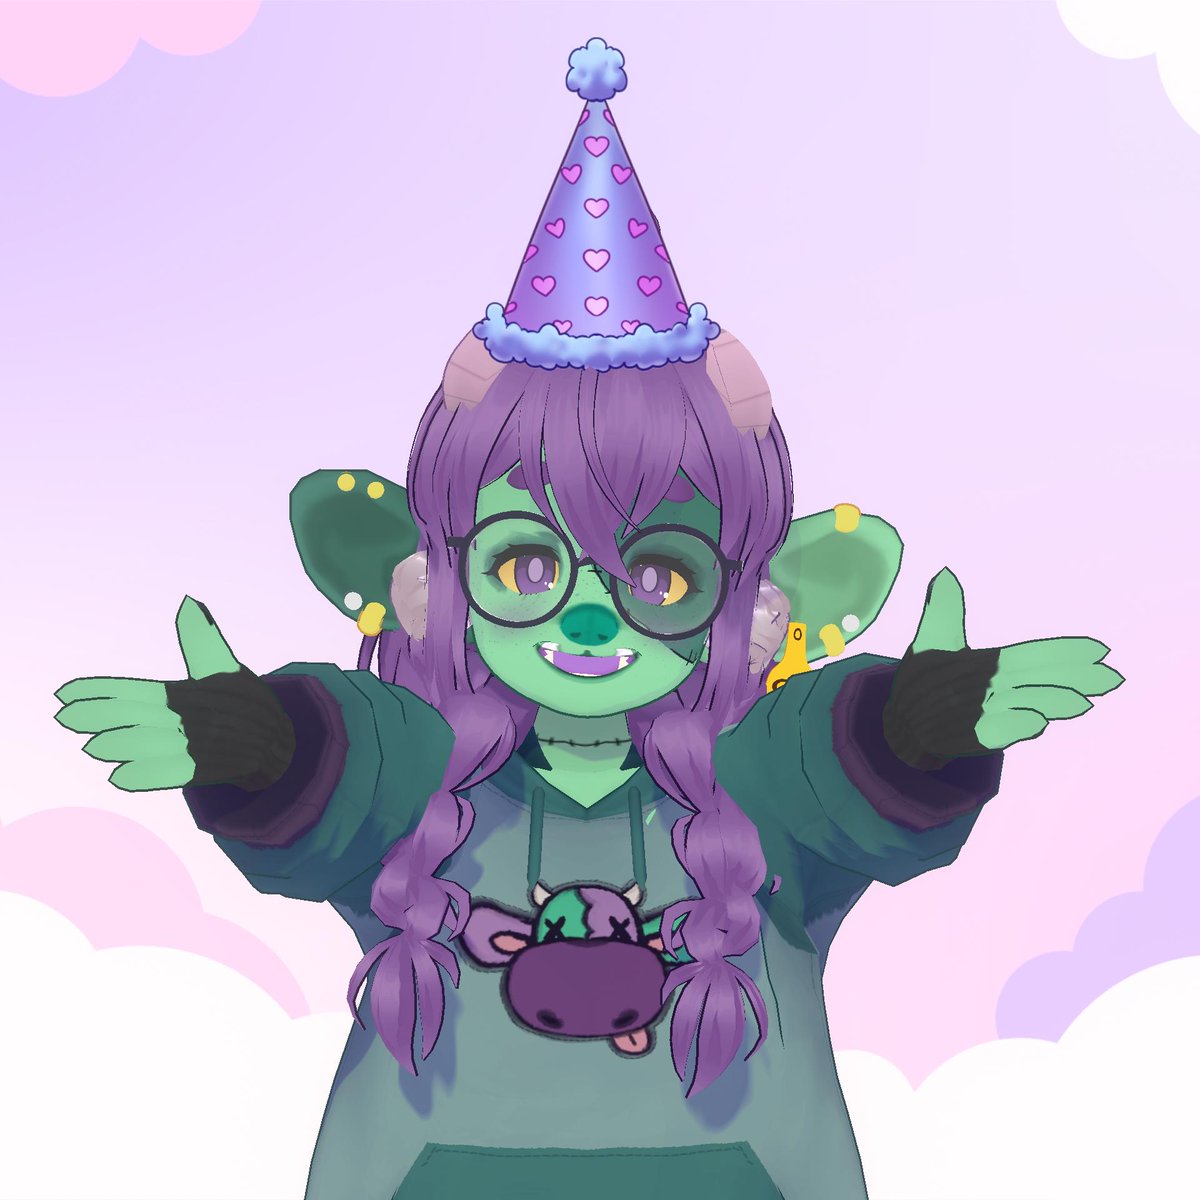 💚💜 GOING LIVE @ 8:00 PM (PDT)/11:00 PM (EDT)/3:00 AM (UTC) TONIGHT!! 💚💜

Oh won't you please come to my birthday slumber party? Let's play some nostalgic games and hang out tonight!

LINK IN REPLIES

#ENVtuber #VTuber #Goblin #Zombie #cozychaos #BirthdayParty #birthdaystream